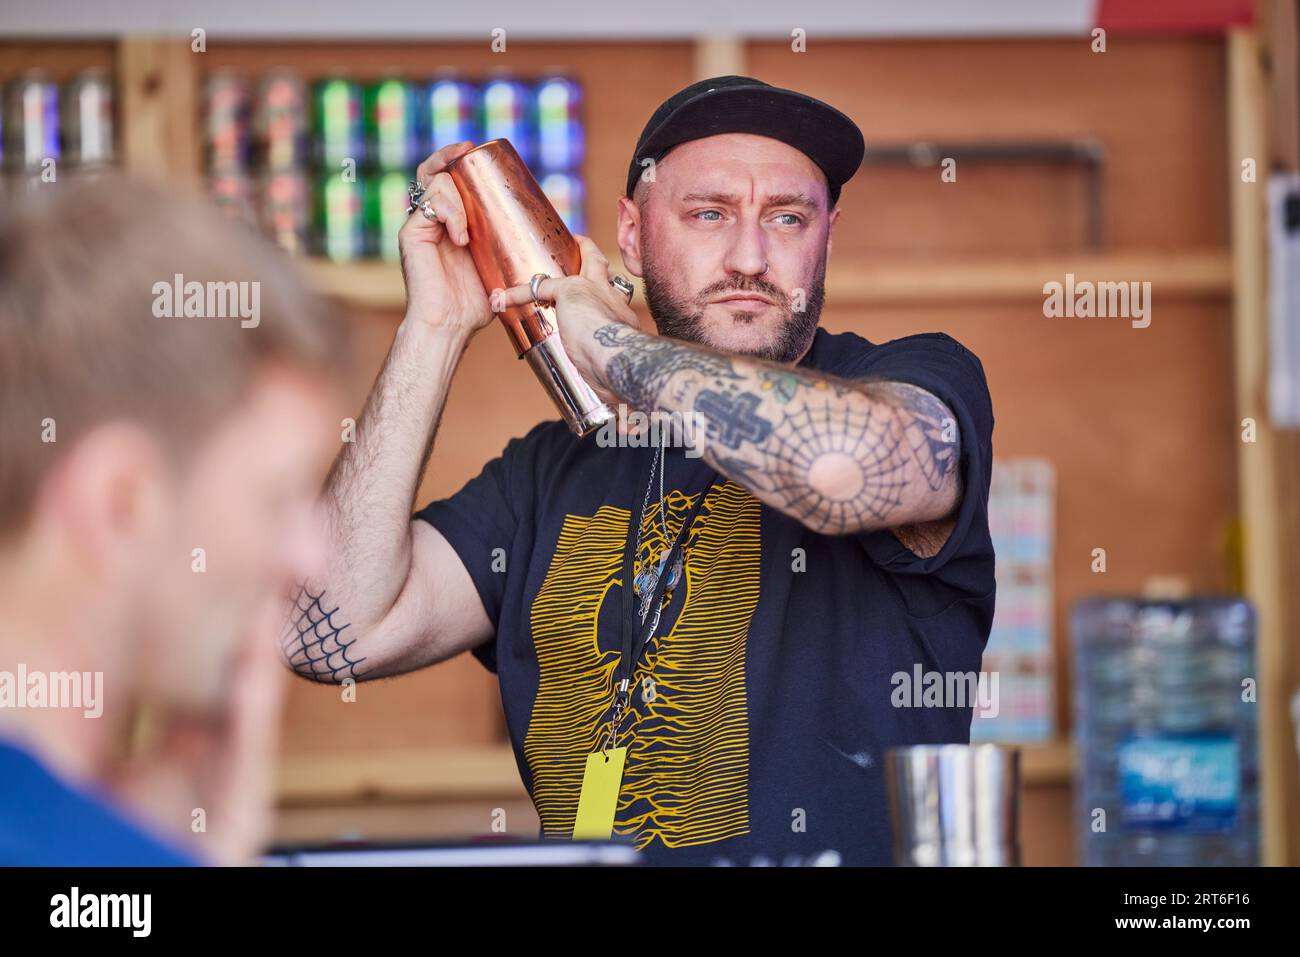 Manchester barman making cocktails Stock Photo